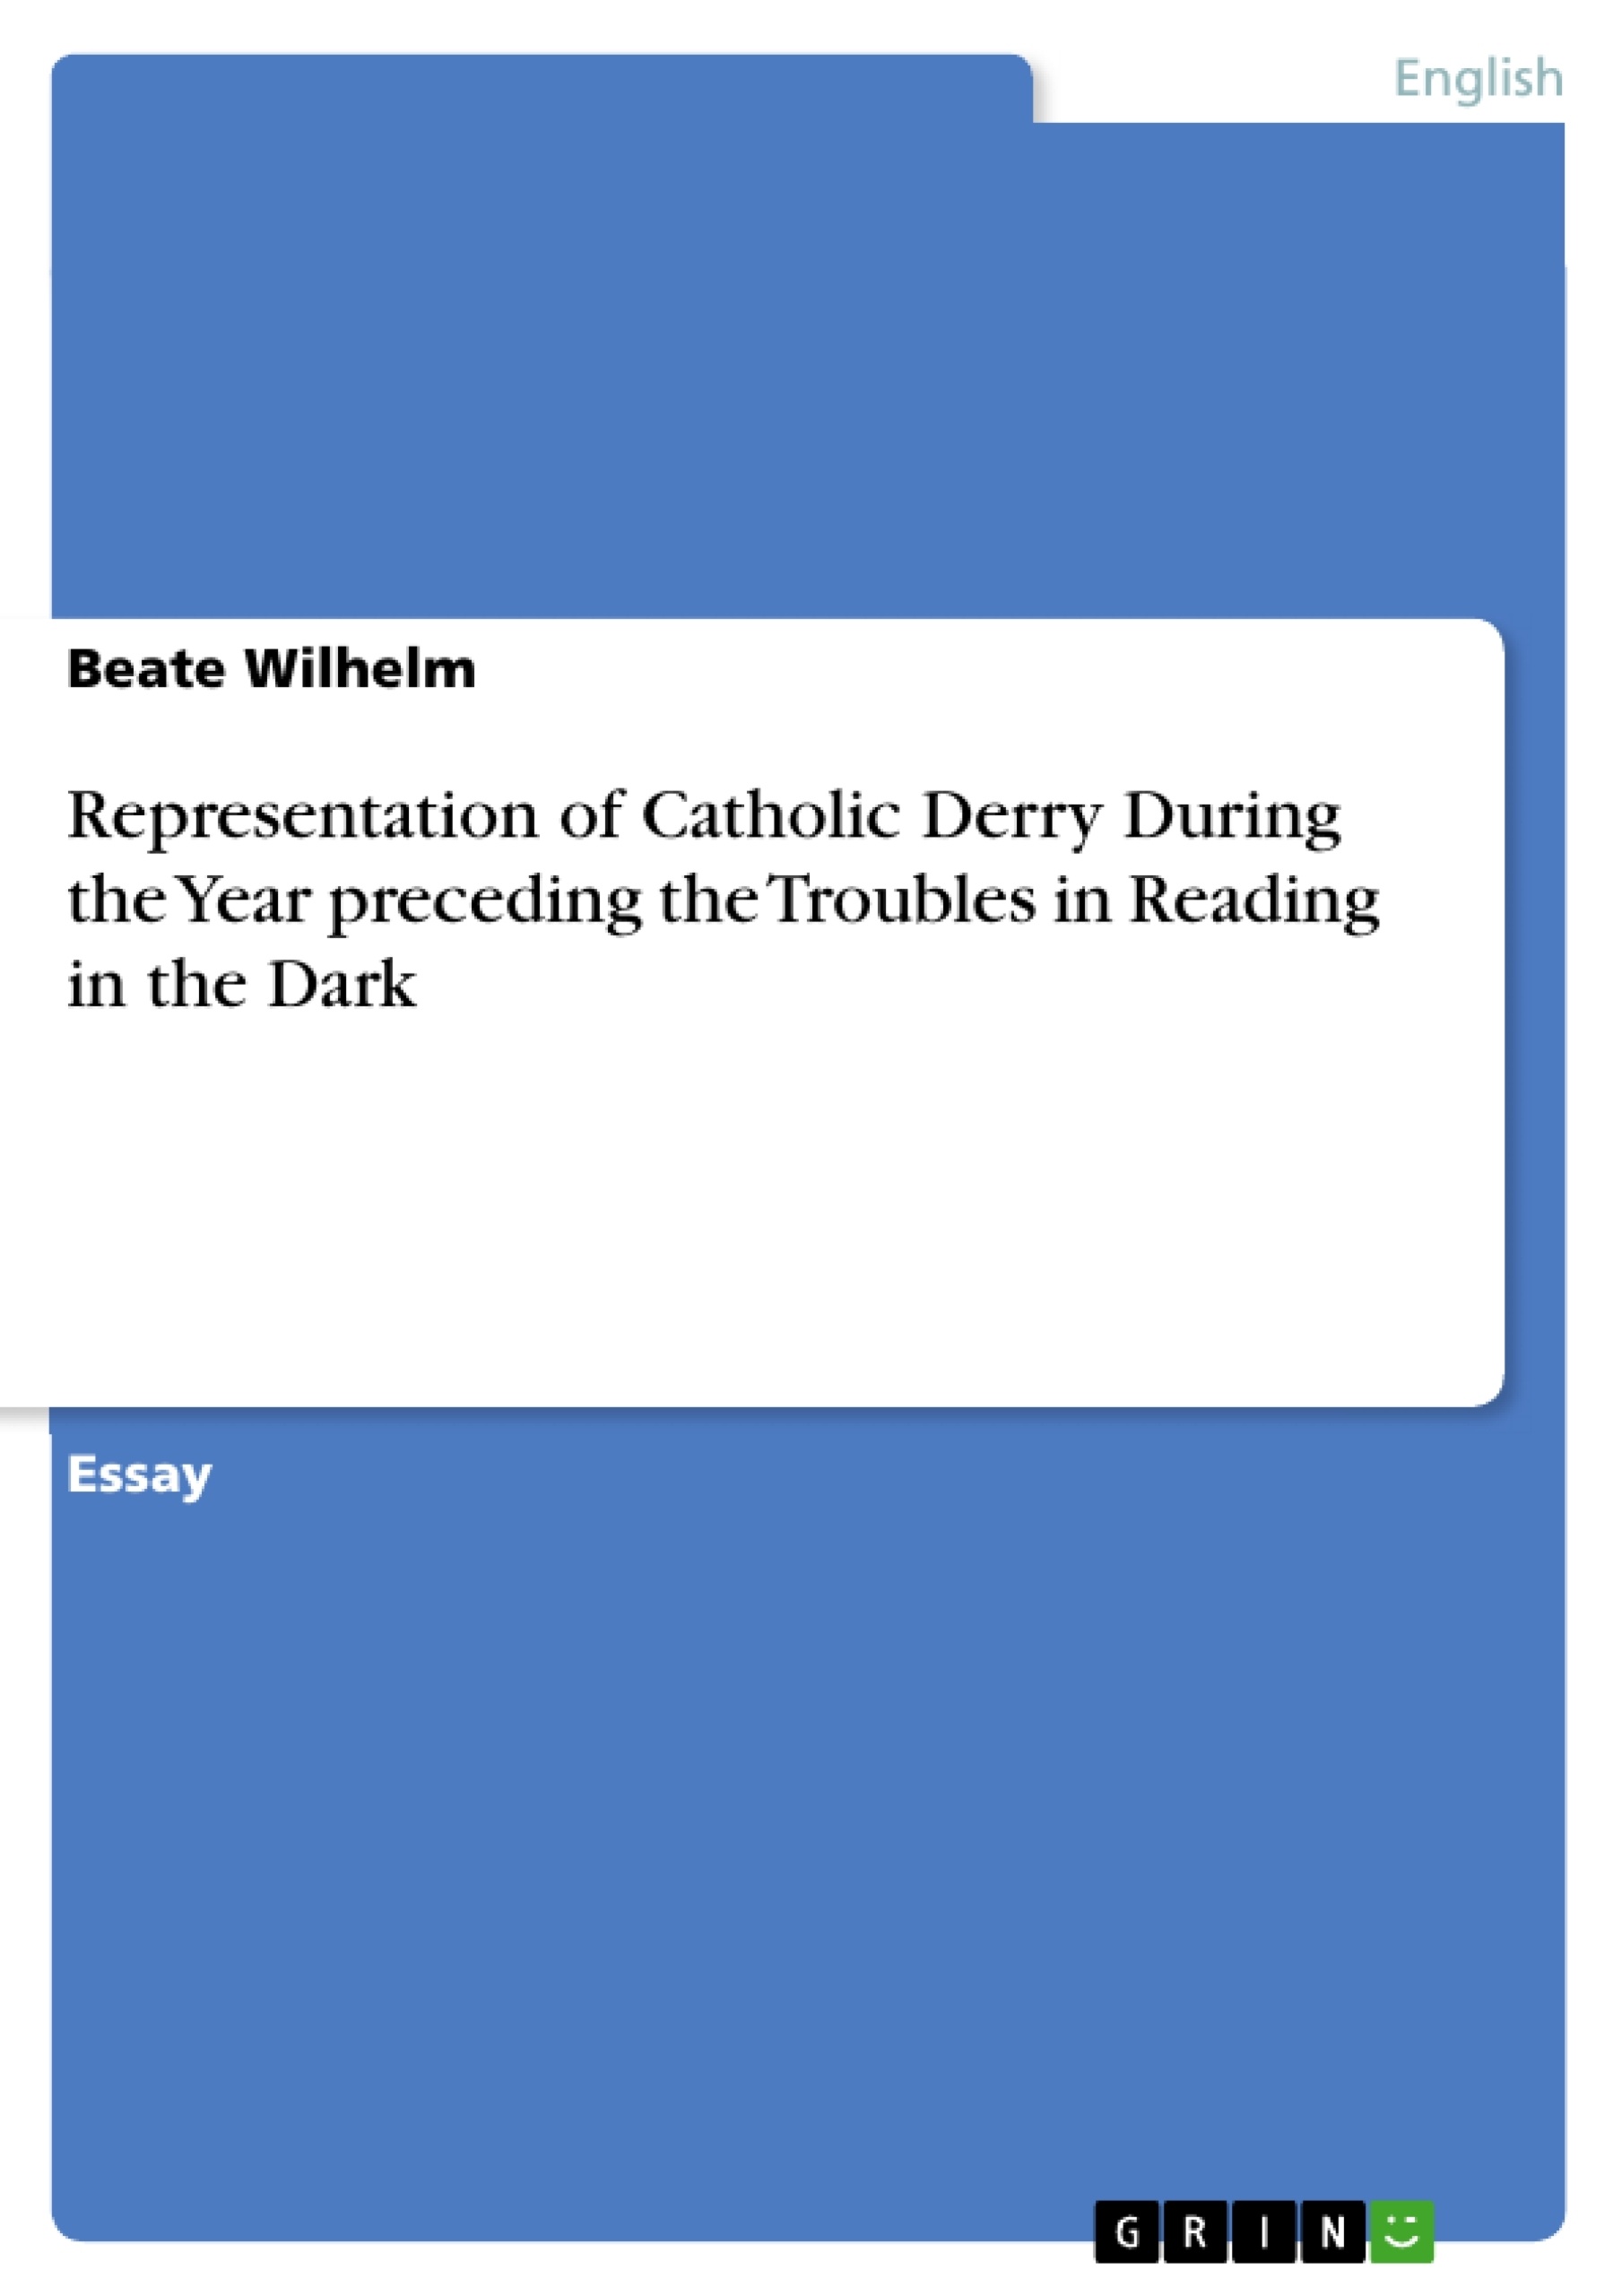 Titre: Representation of Catholic Derry During the Year preceding the Troubles in Reading in the Dark